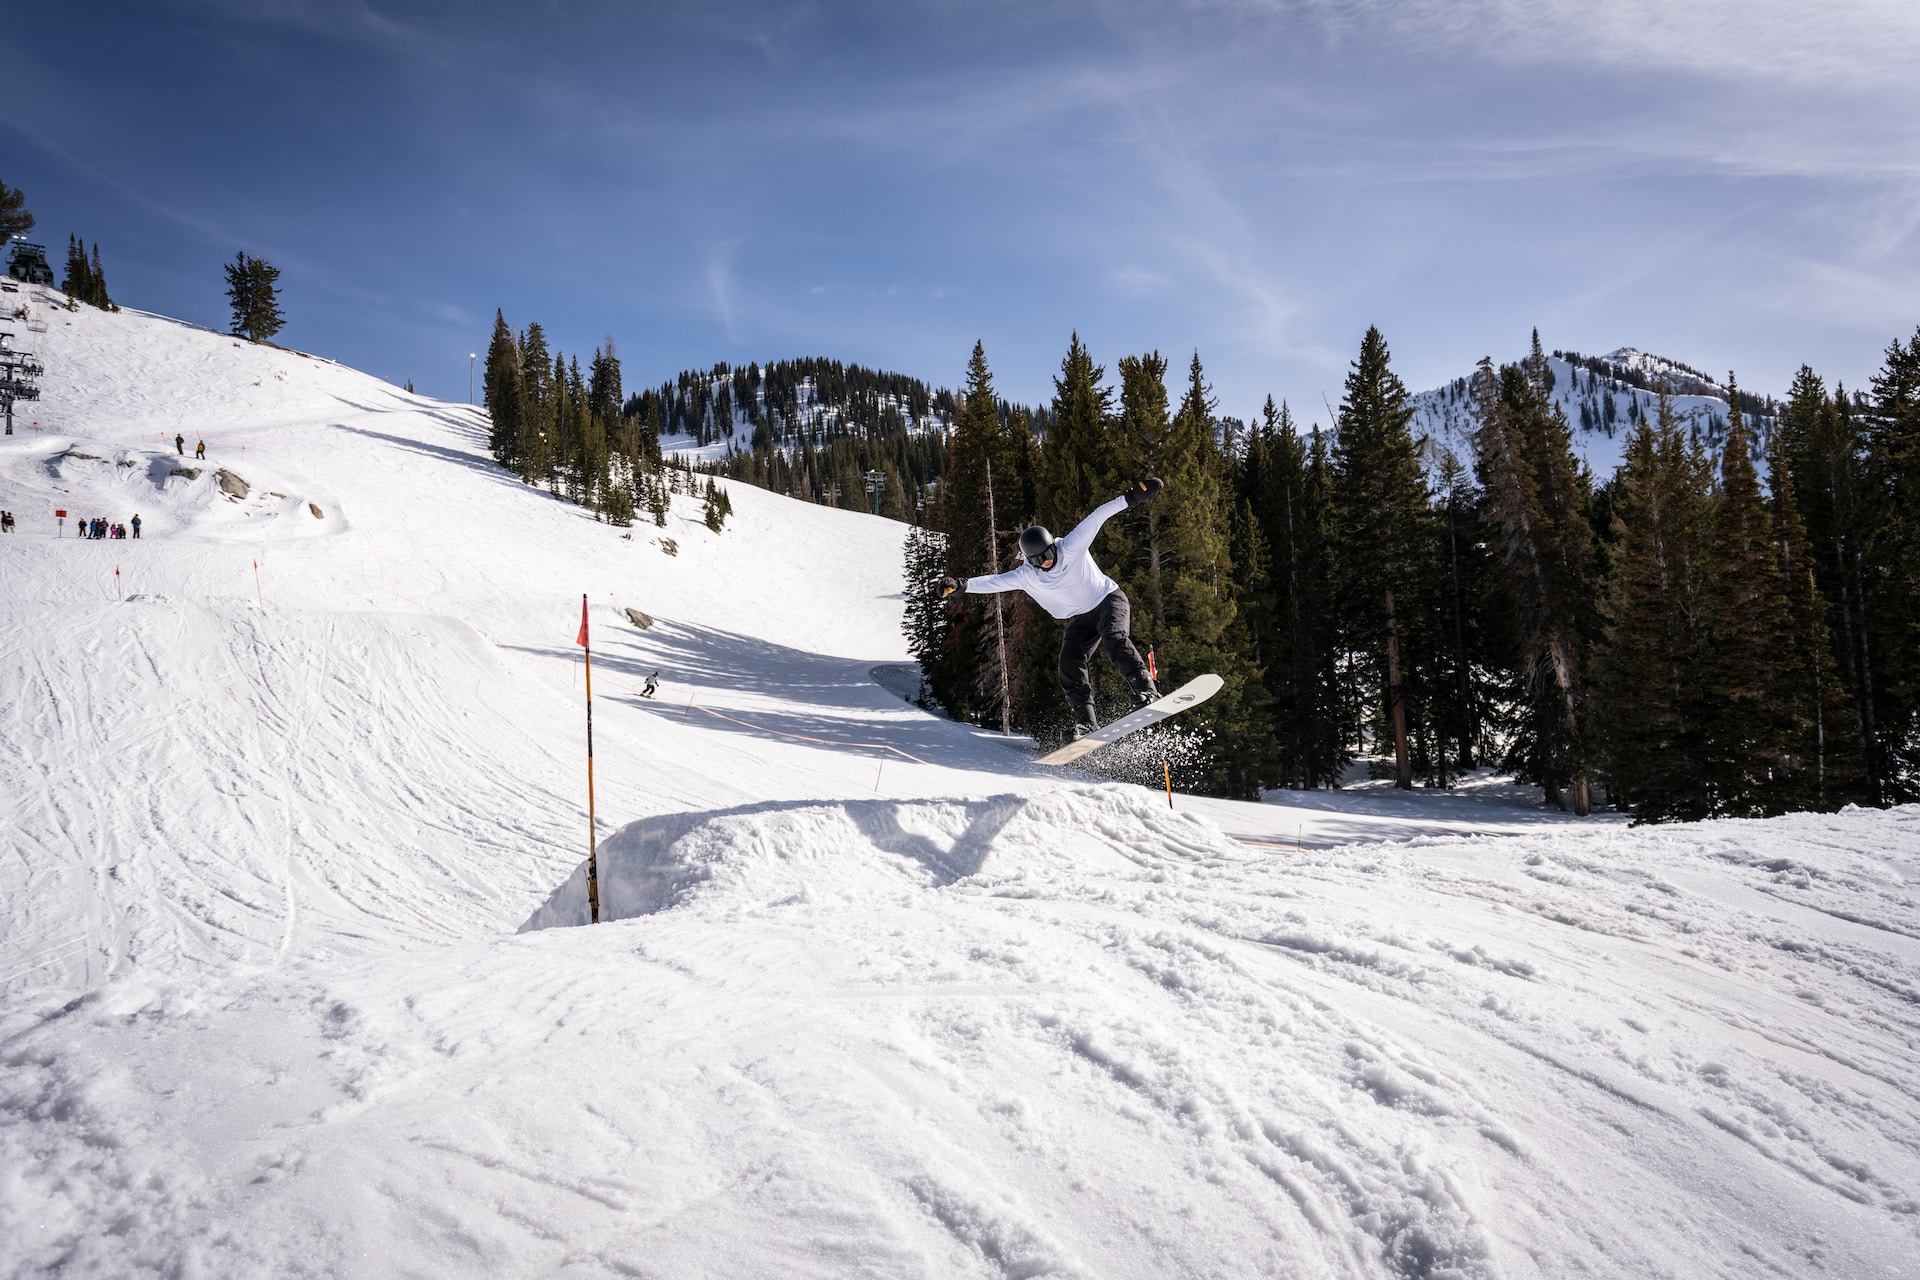 Experience Park City skiing on your next visit